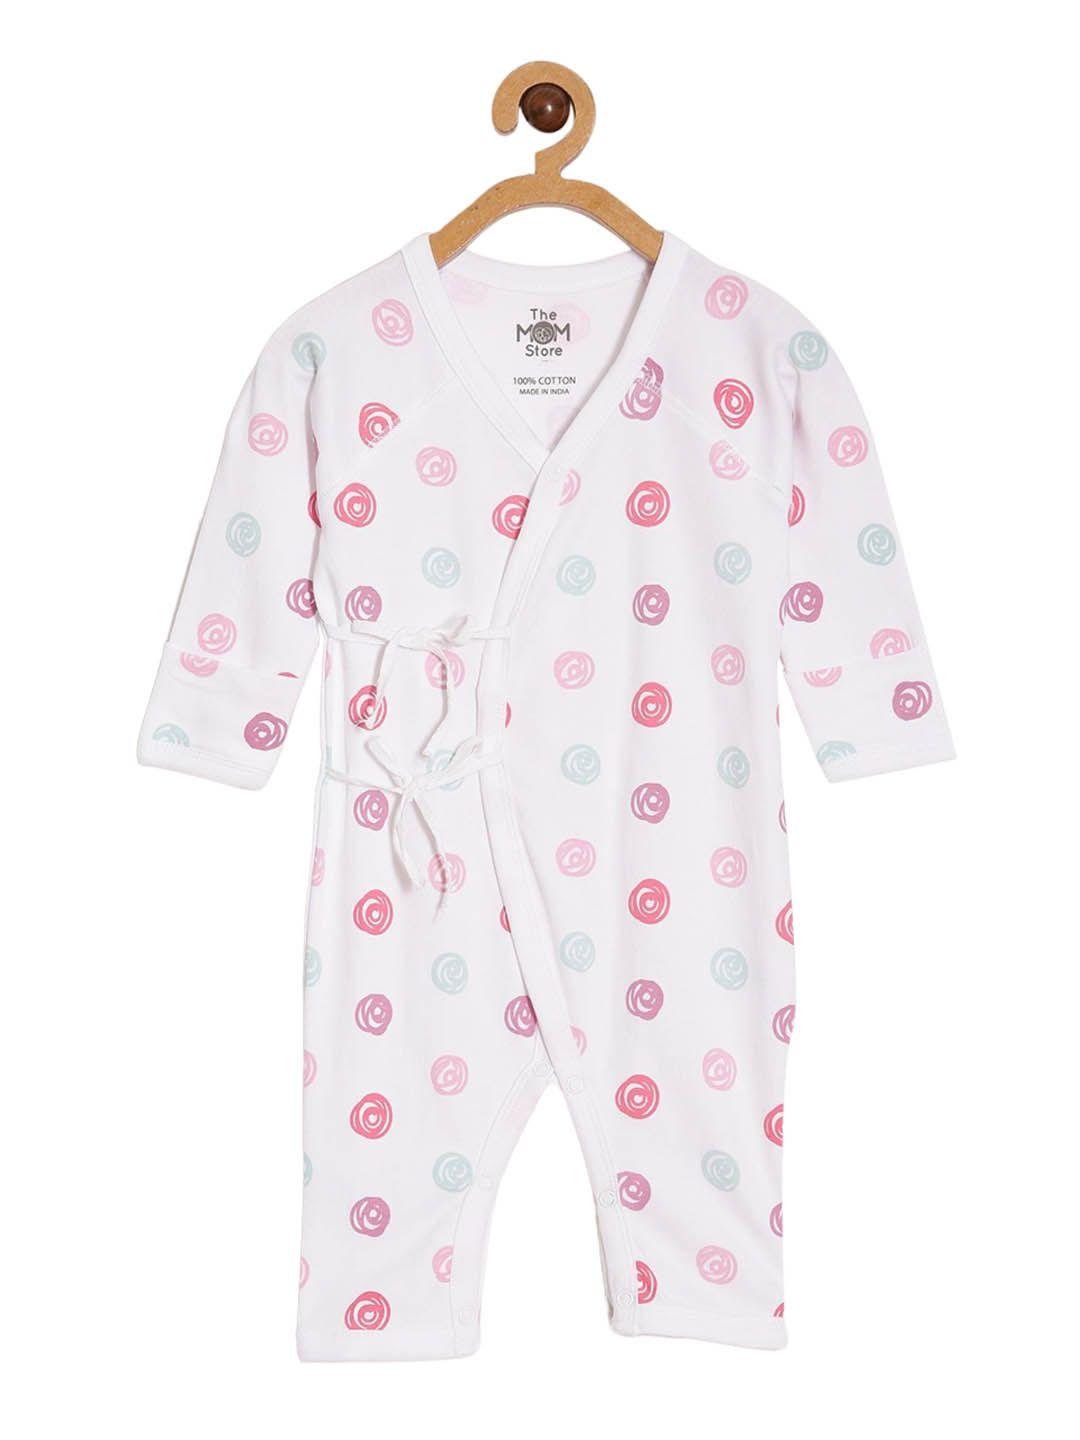 the-mom-store-infants-printed-cotton-romper